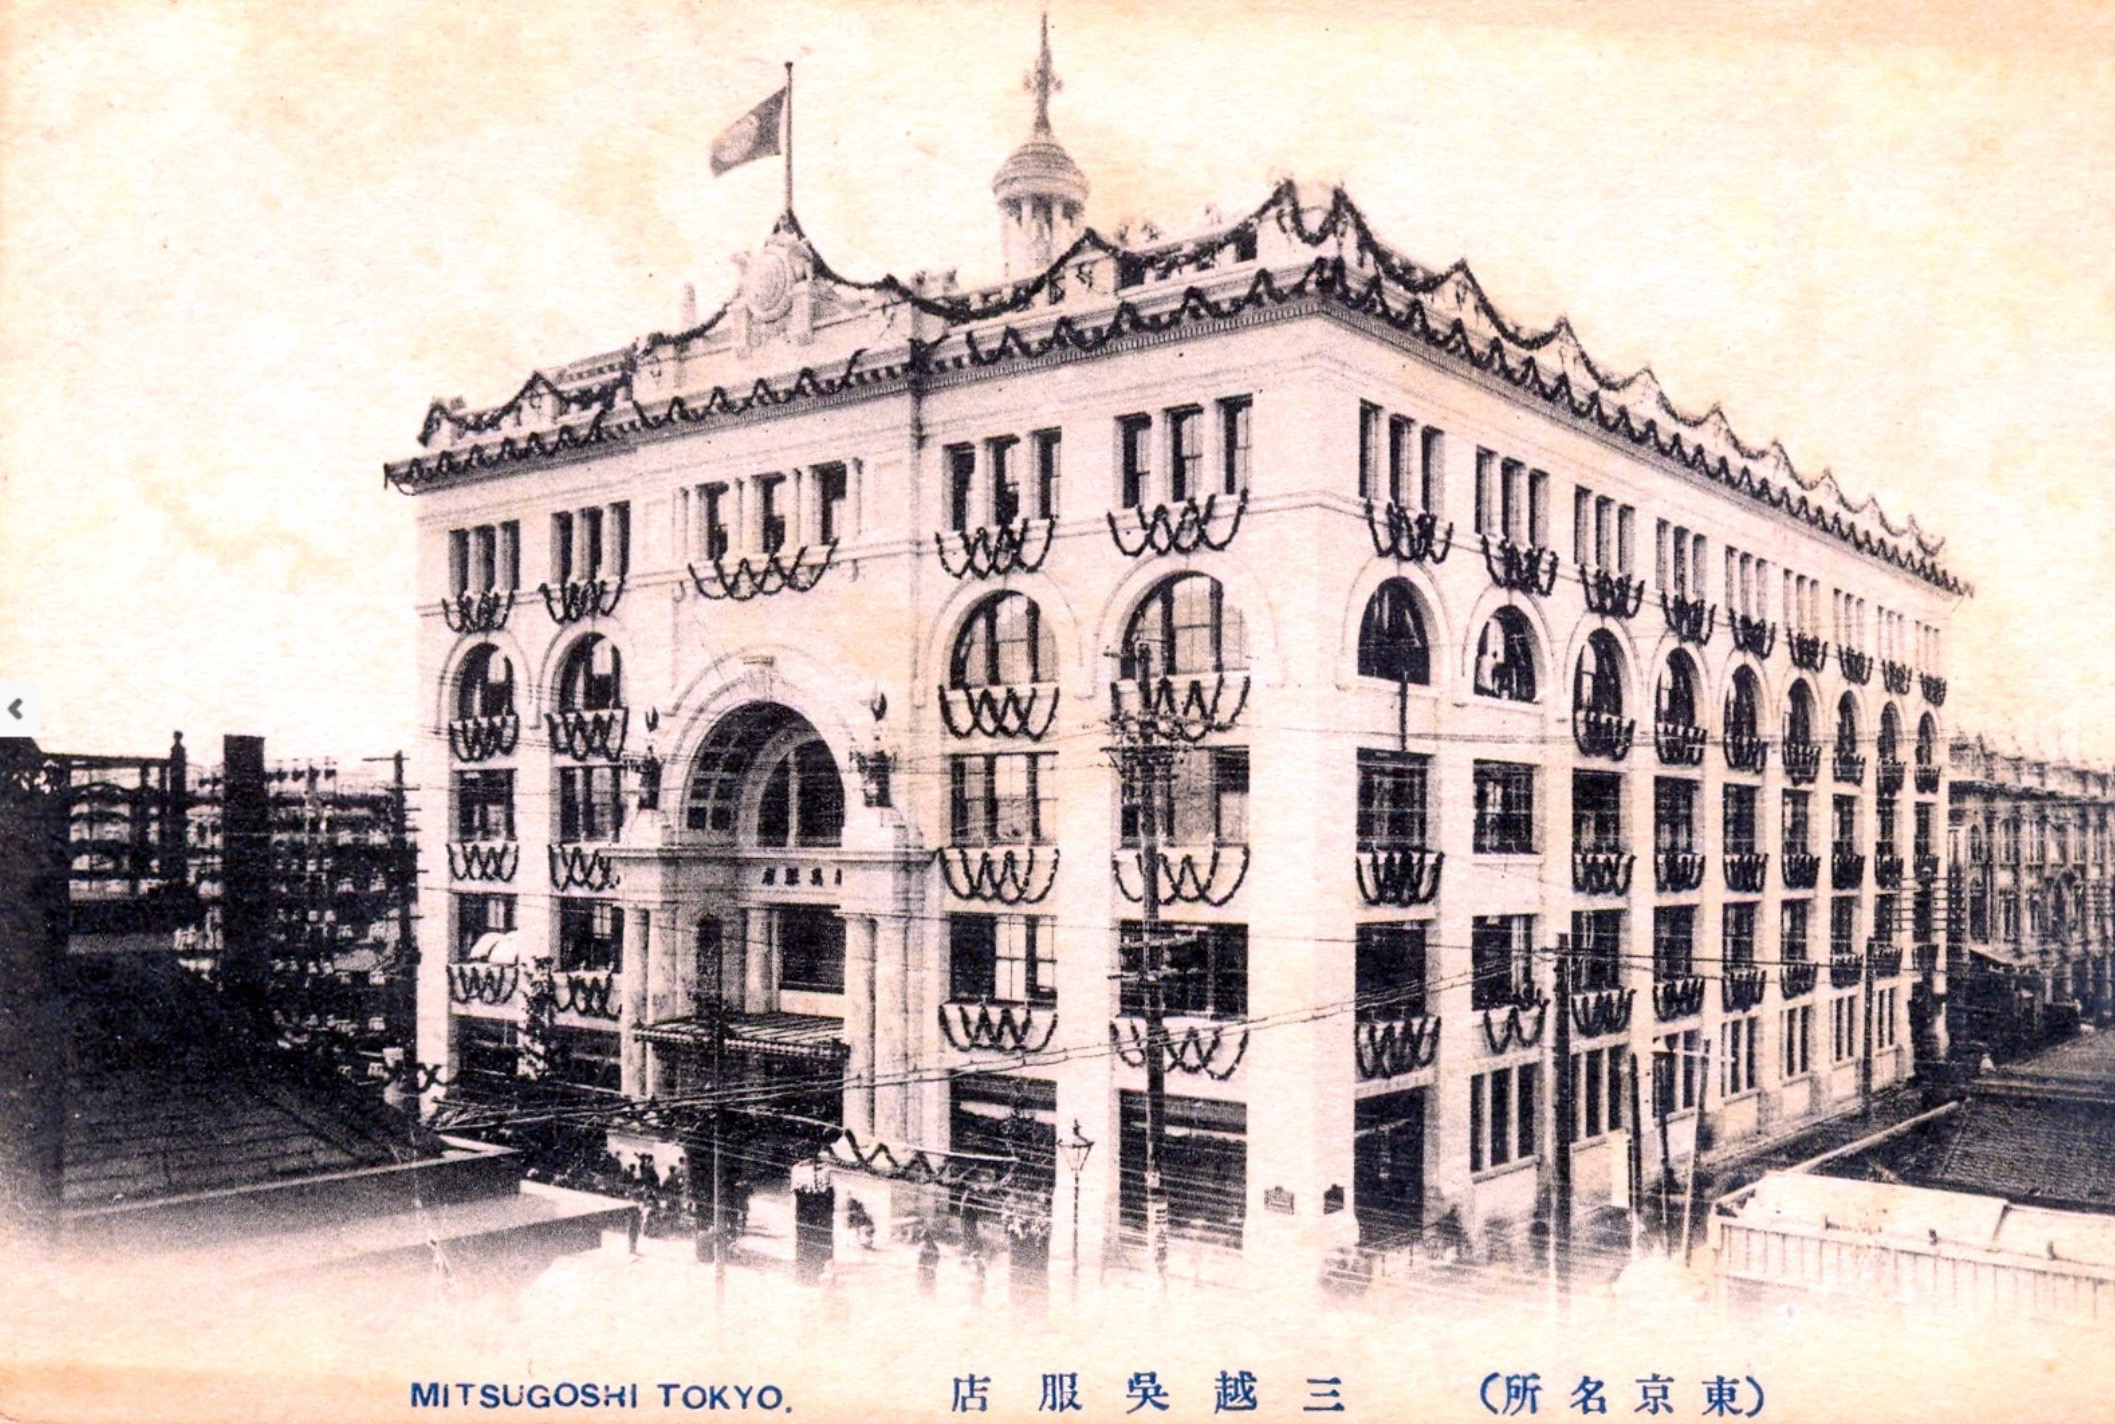 photograph of the Mitsukoshi department store in Tokyo Japan